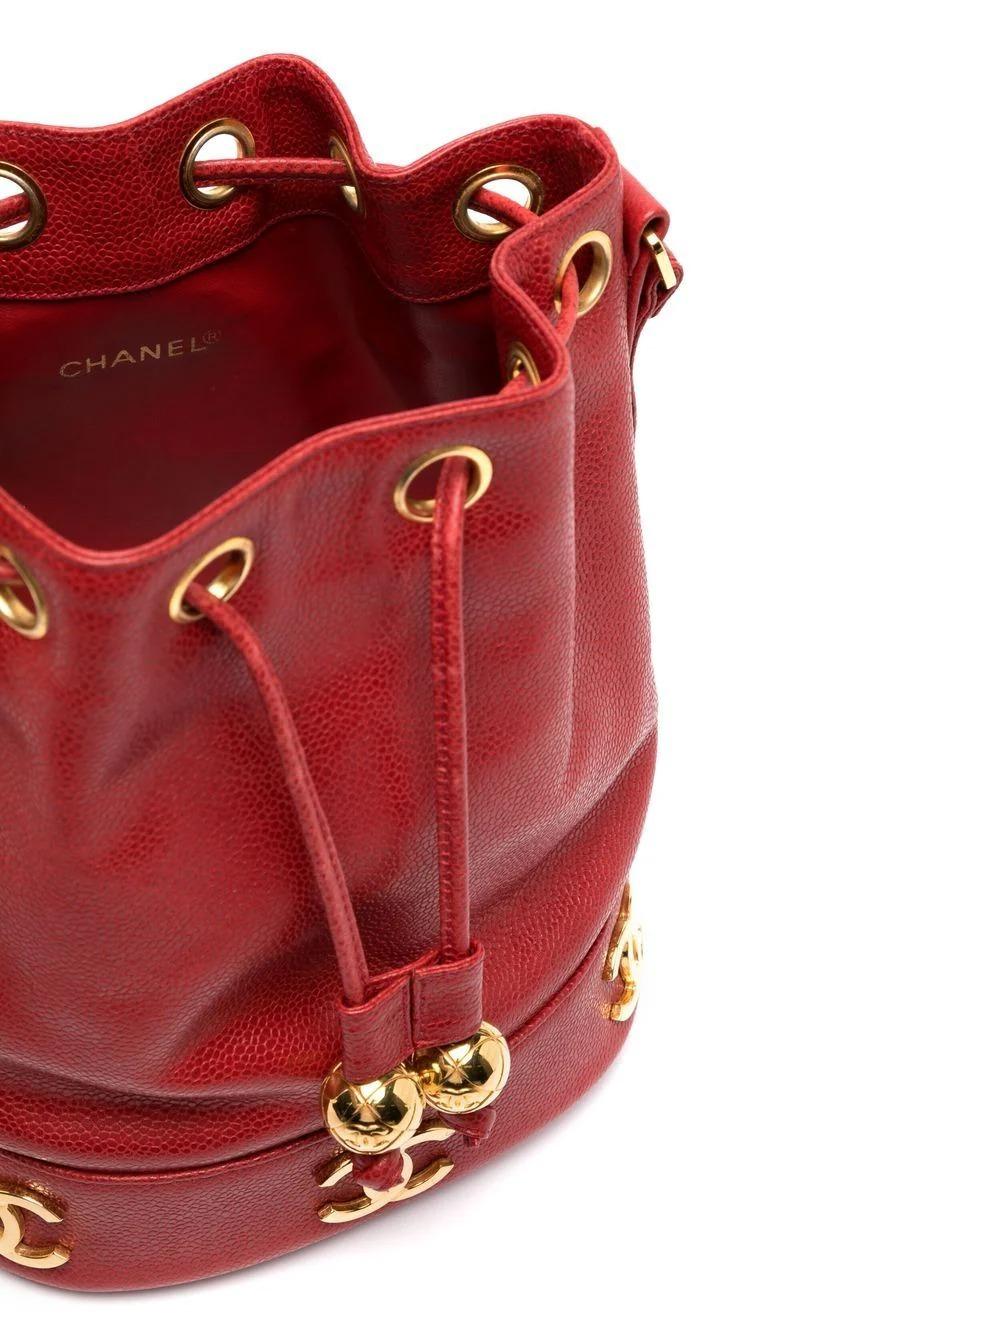 Chanel 1992 Red Caviar Plaque Bucket Drawstring Tote Crossbody Bag For Sale 2